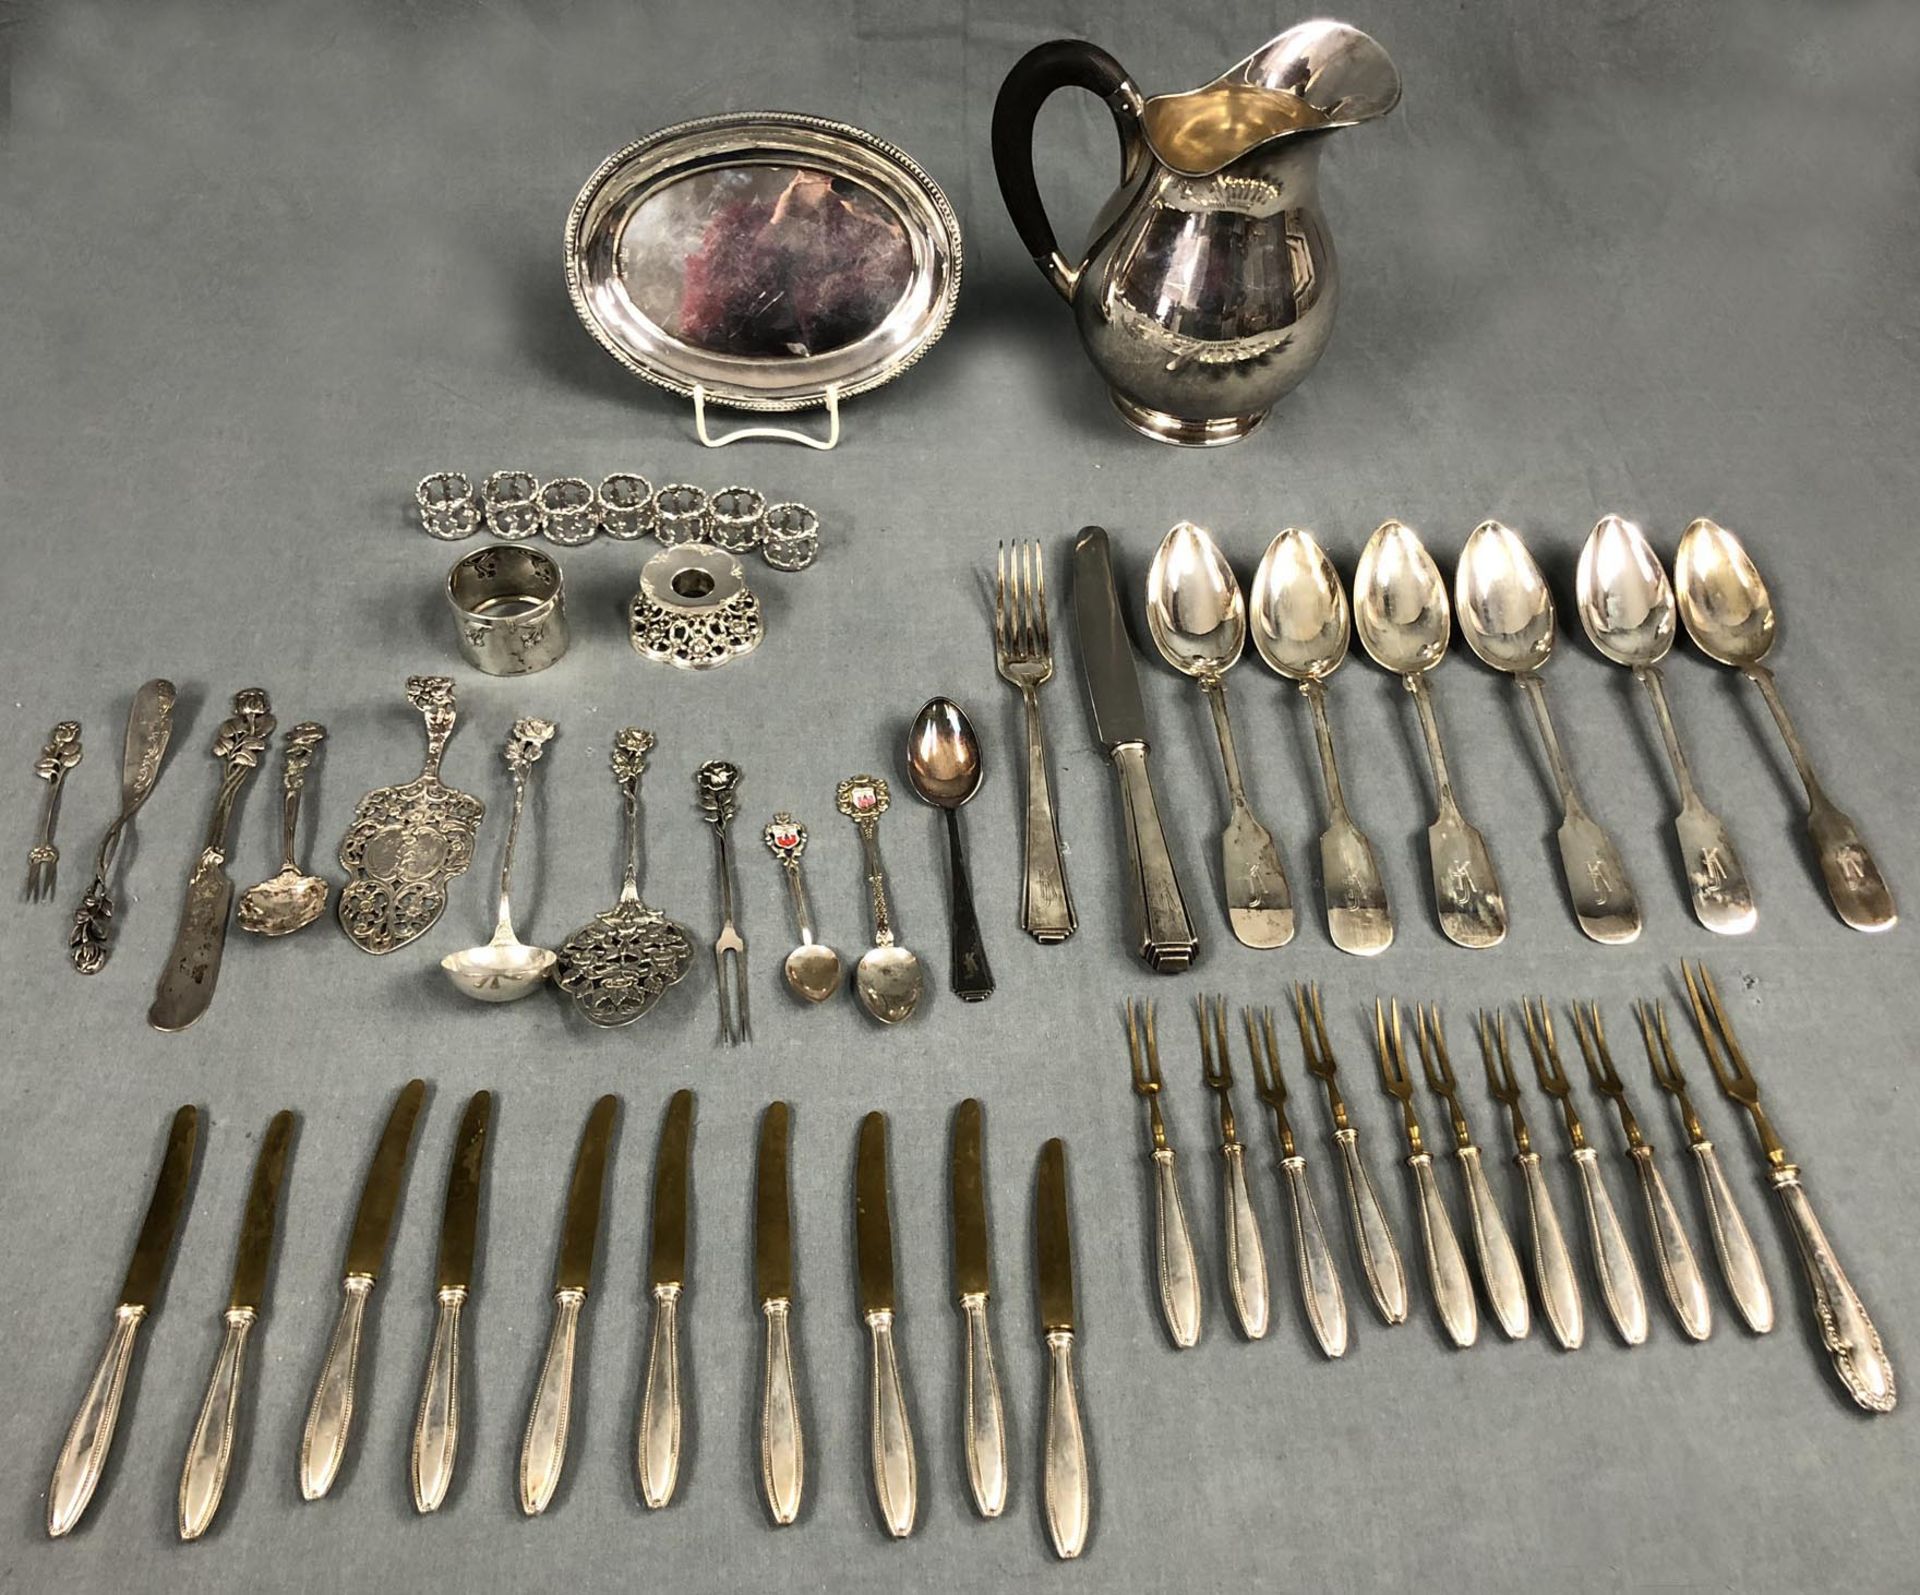 Silver. Some items Sterling.(12 + 13 + 15 + 41). 3084 grams gross. In addition 2 boxes.Silber. - Bild 11 aus 14